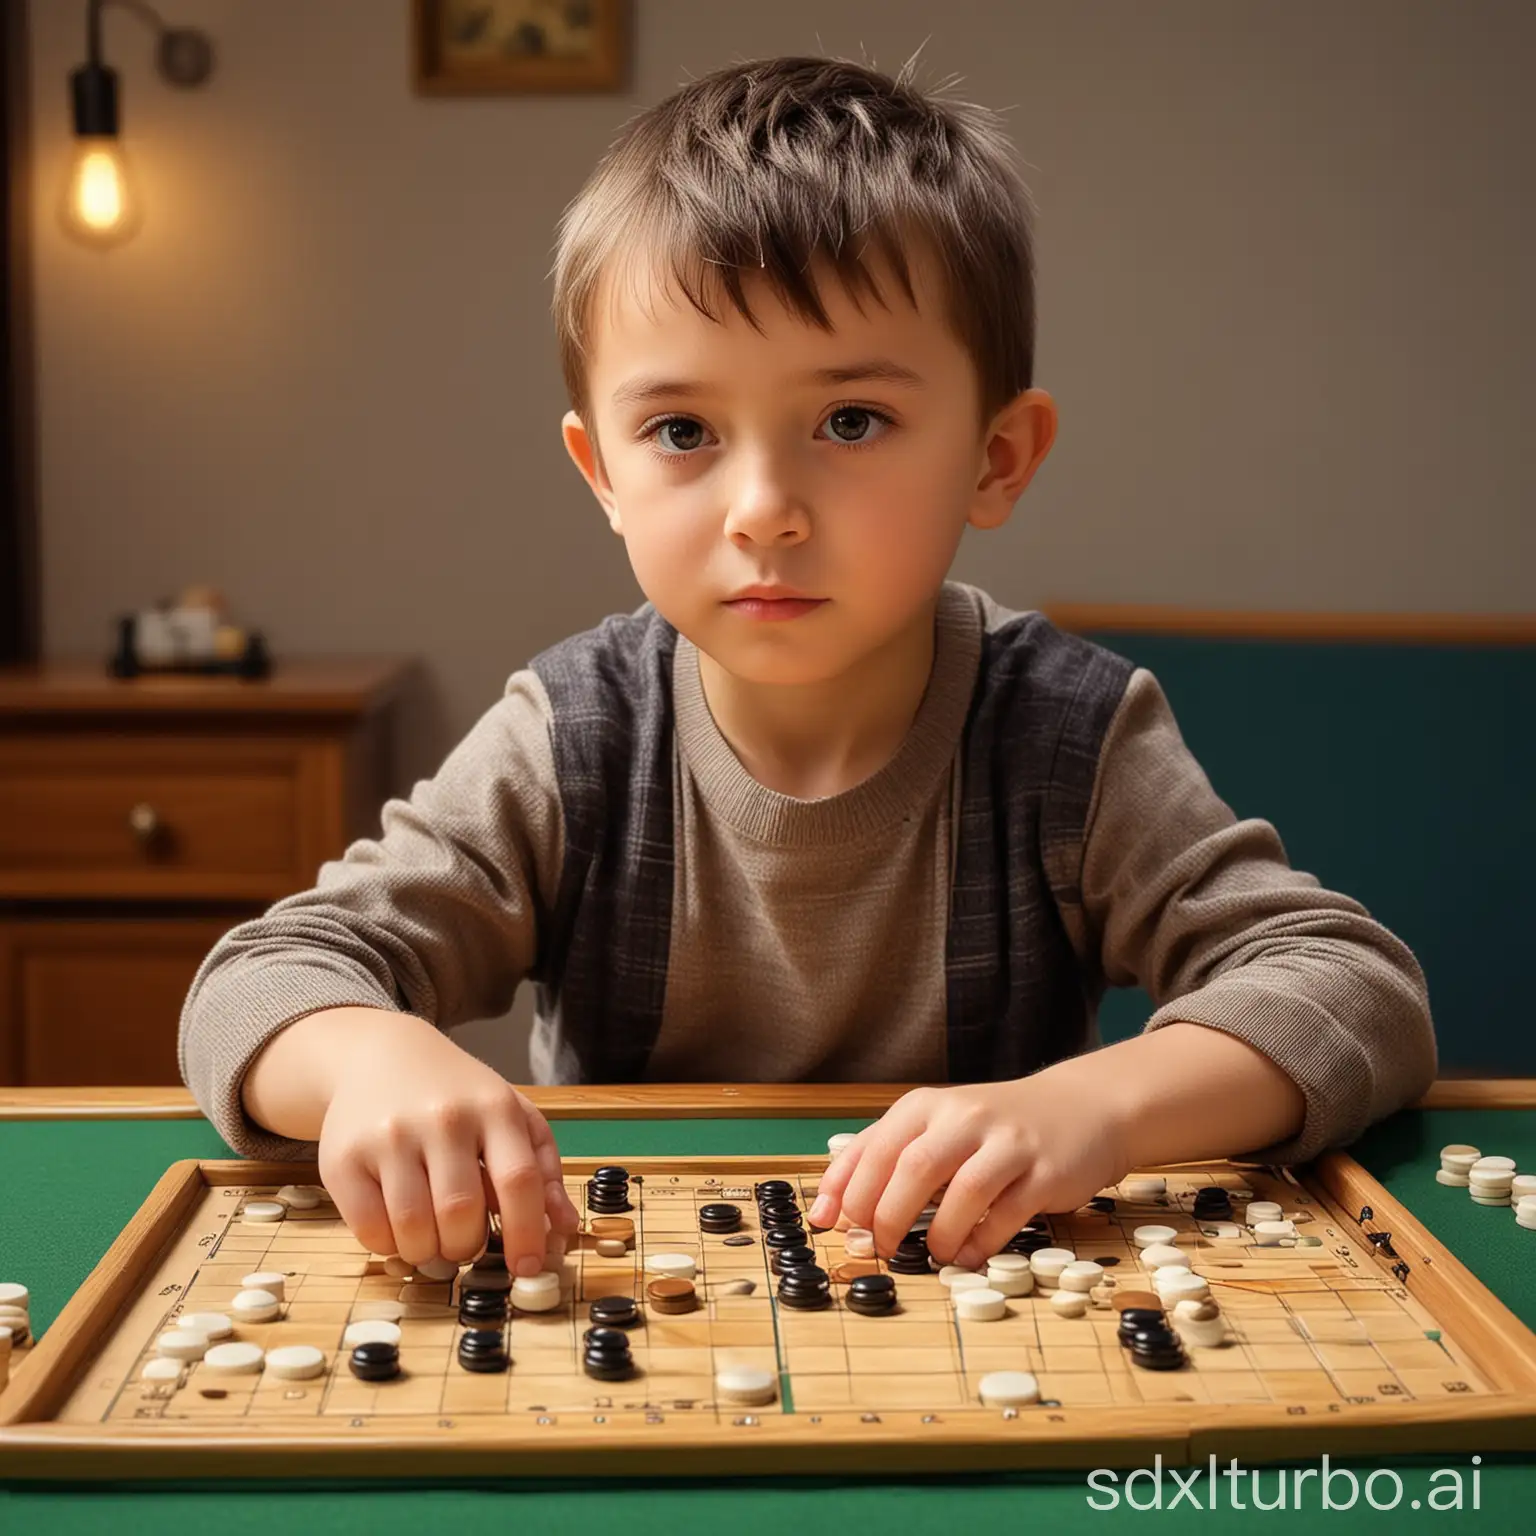 a little beautiful and handsome boy playing Go game, high quality, 8K Ultra HD, masterpiece, beautiful little boy 7 years old,, awesome full color, playing the game of Go